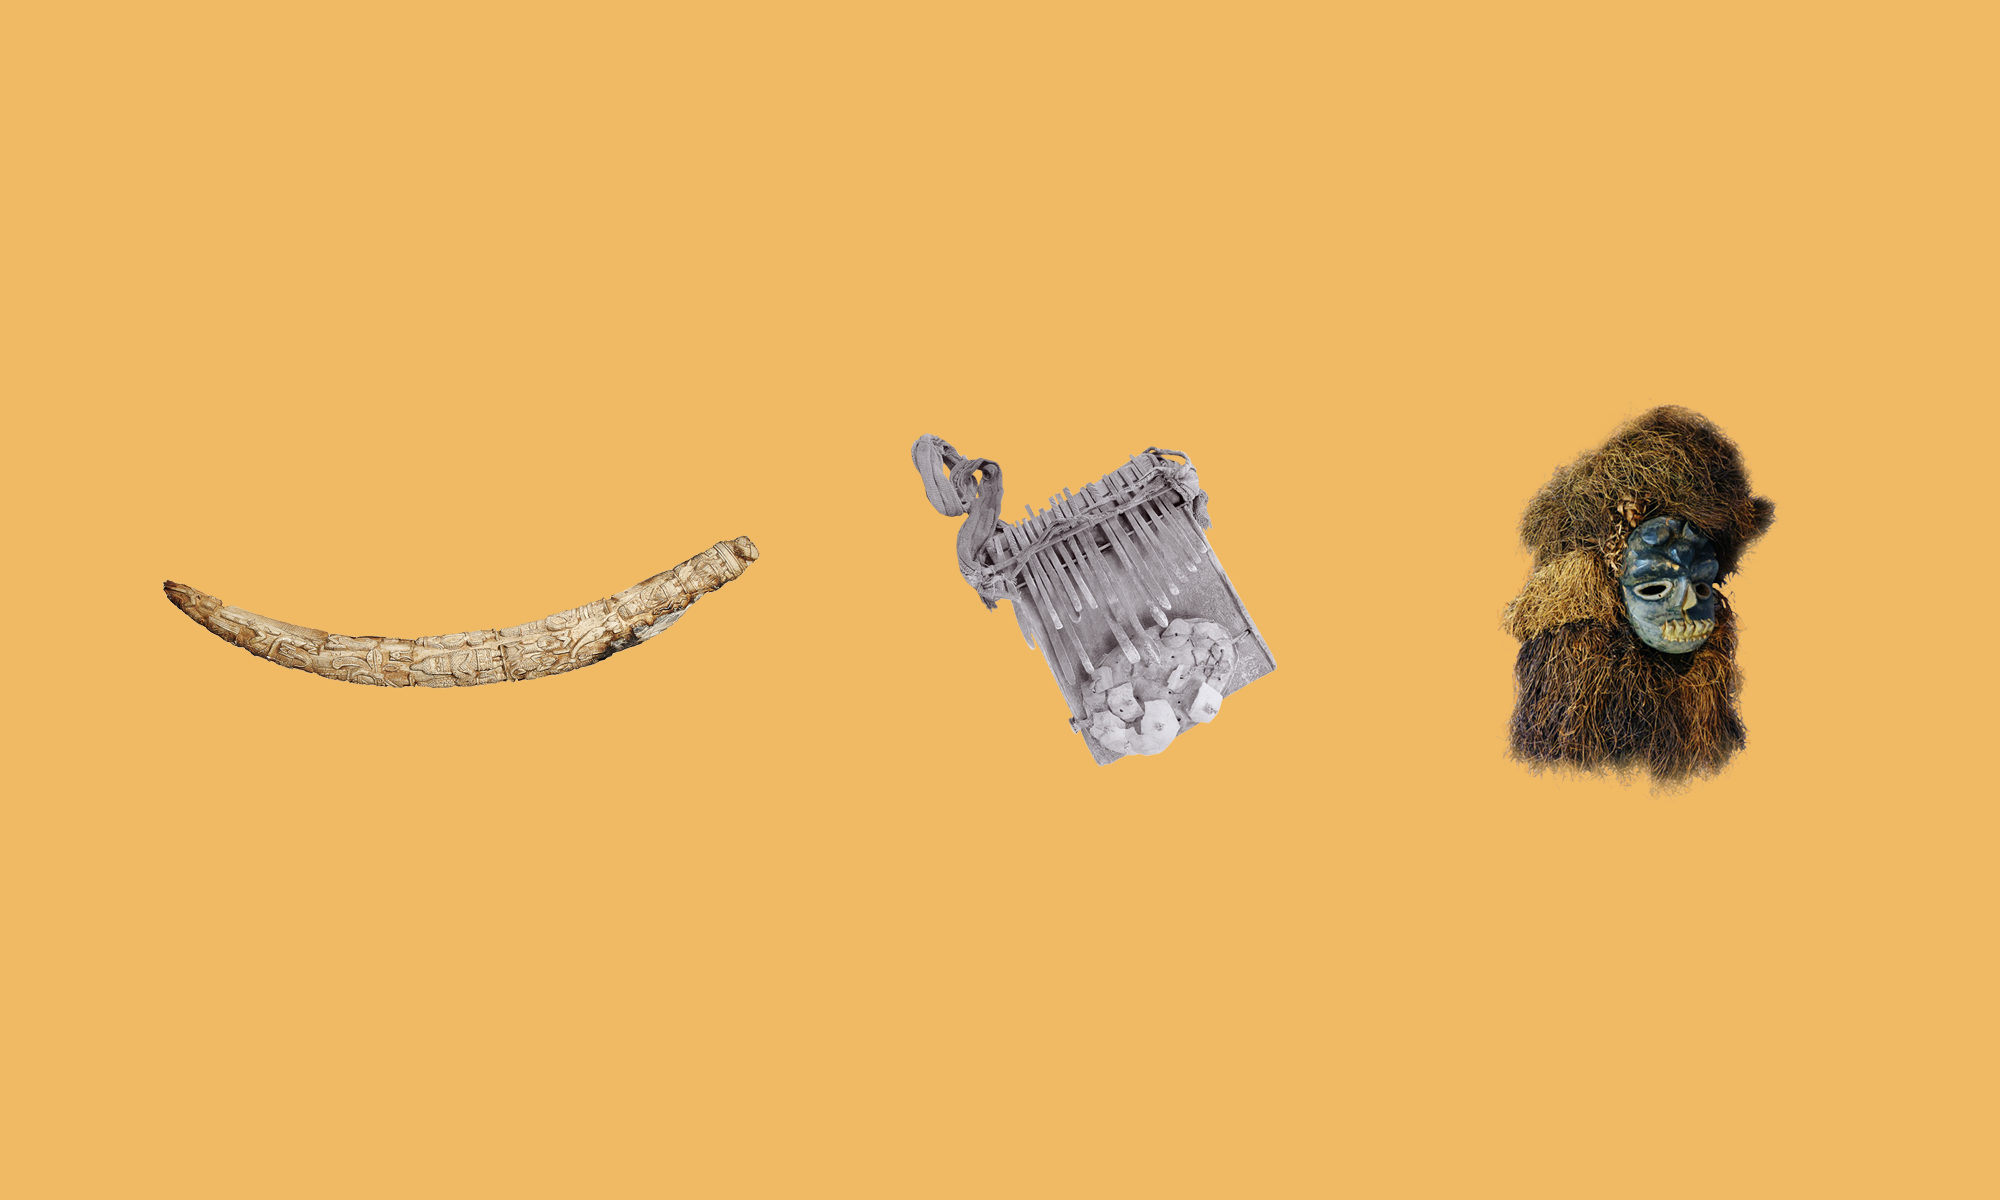 An ivory tusk, a mbira musical instrument, and an Ekpo mask on a yellow background